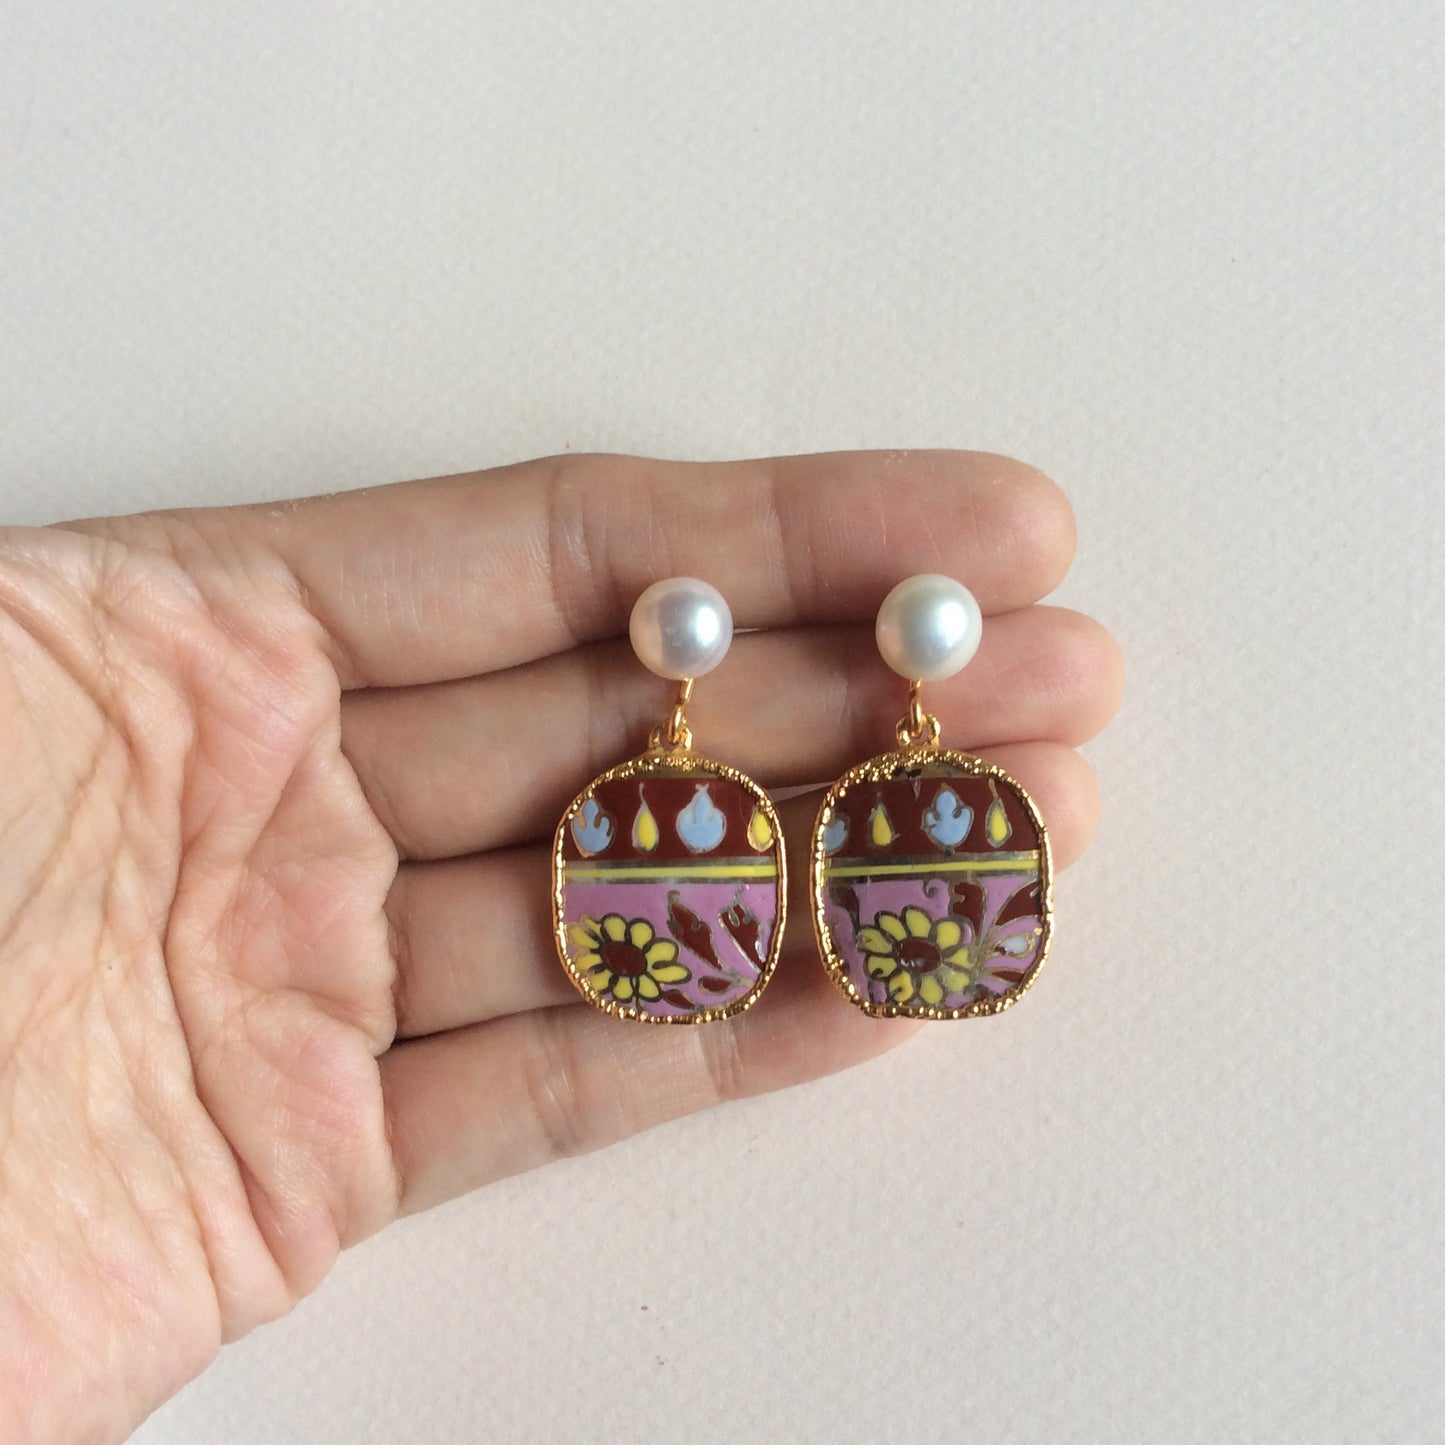 Pink batik porcelain earrings with round freshwater pearl studs